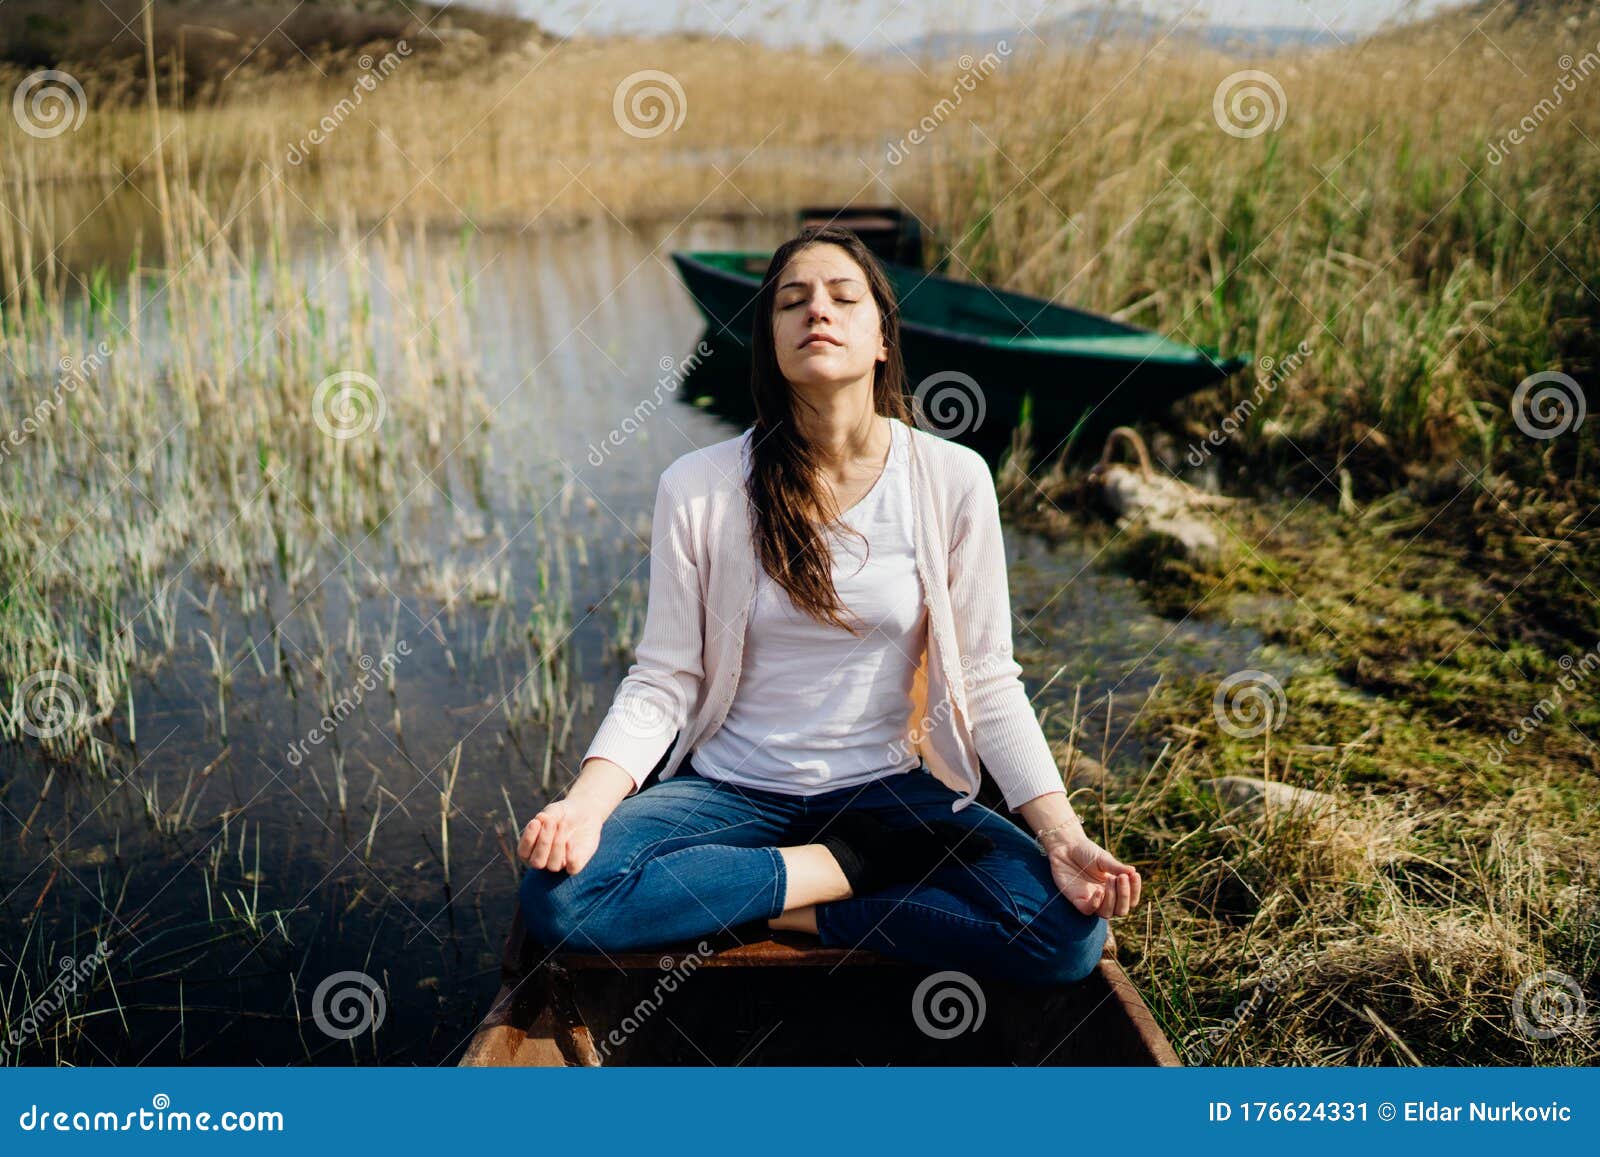 woman meditating in nature.escape from stressful reality.mindful woman practicing meditation.breathing technique.mental state